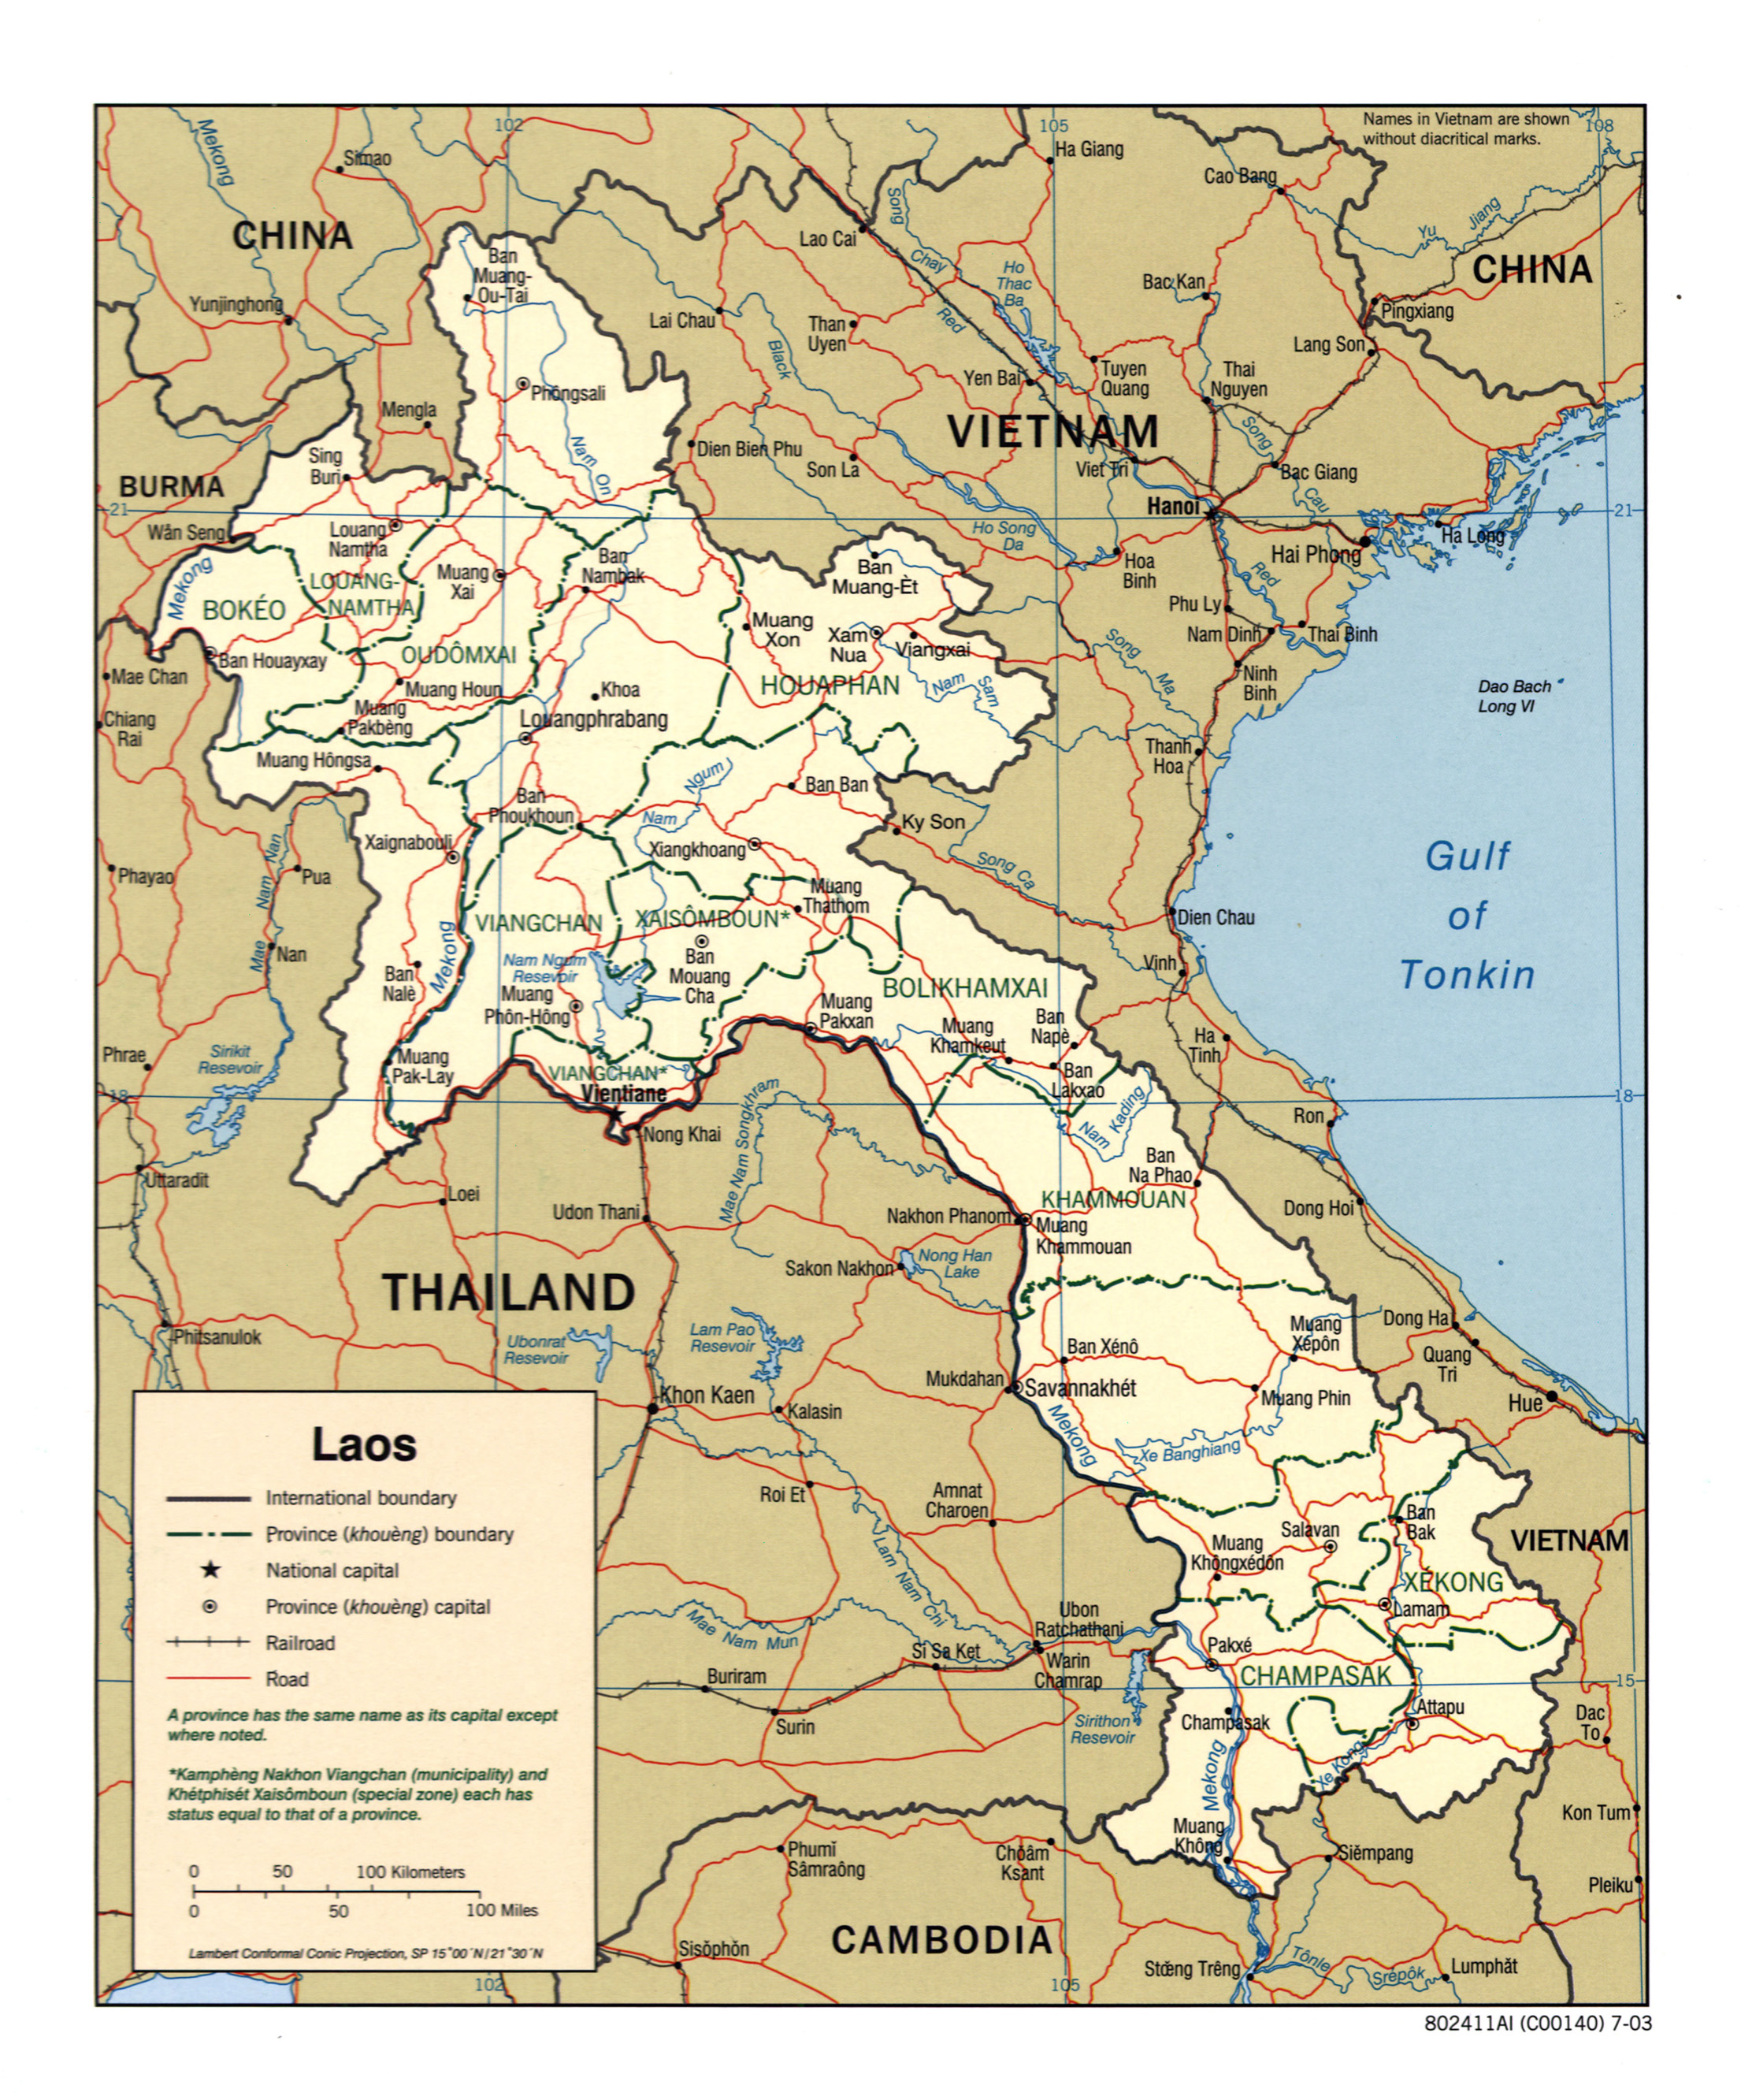 Large Detailed Political And Administrative Map Of Laos With Roads Railroads And Major Cities 2003 